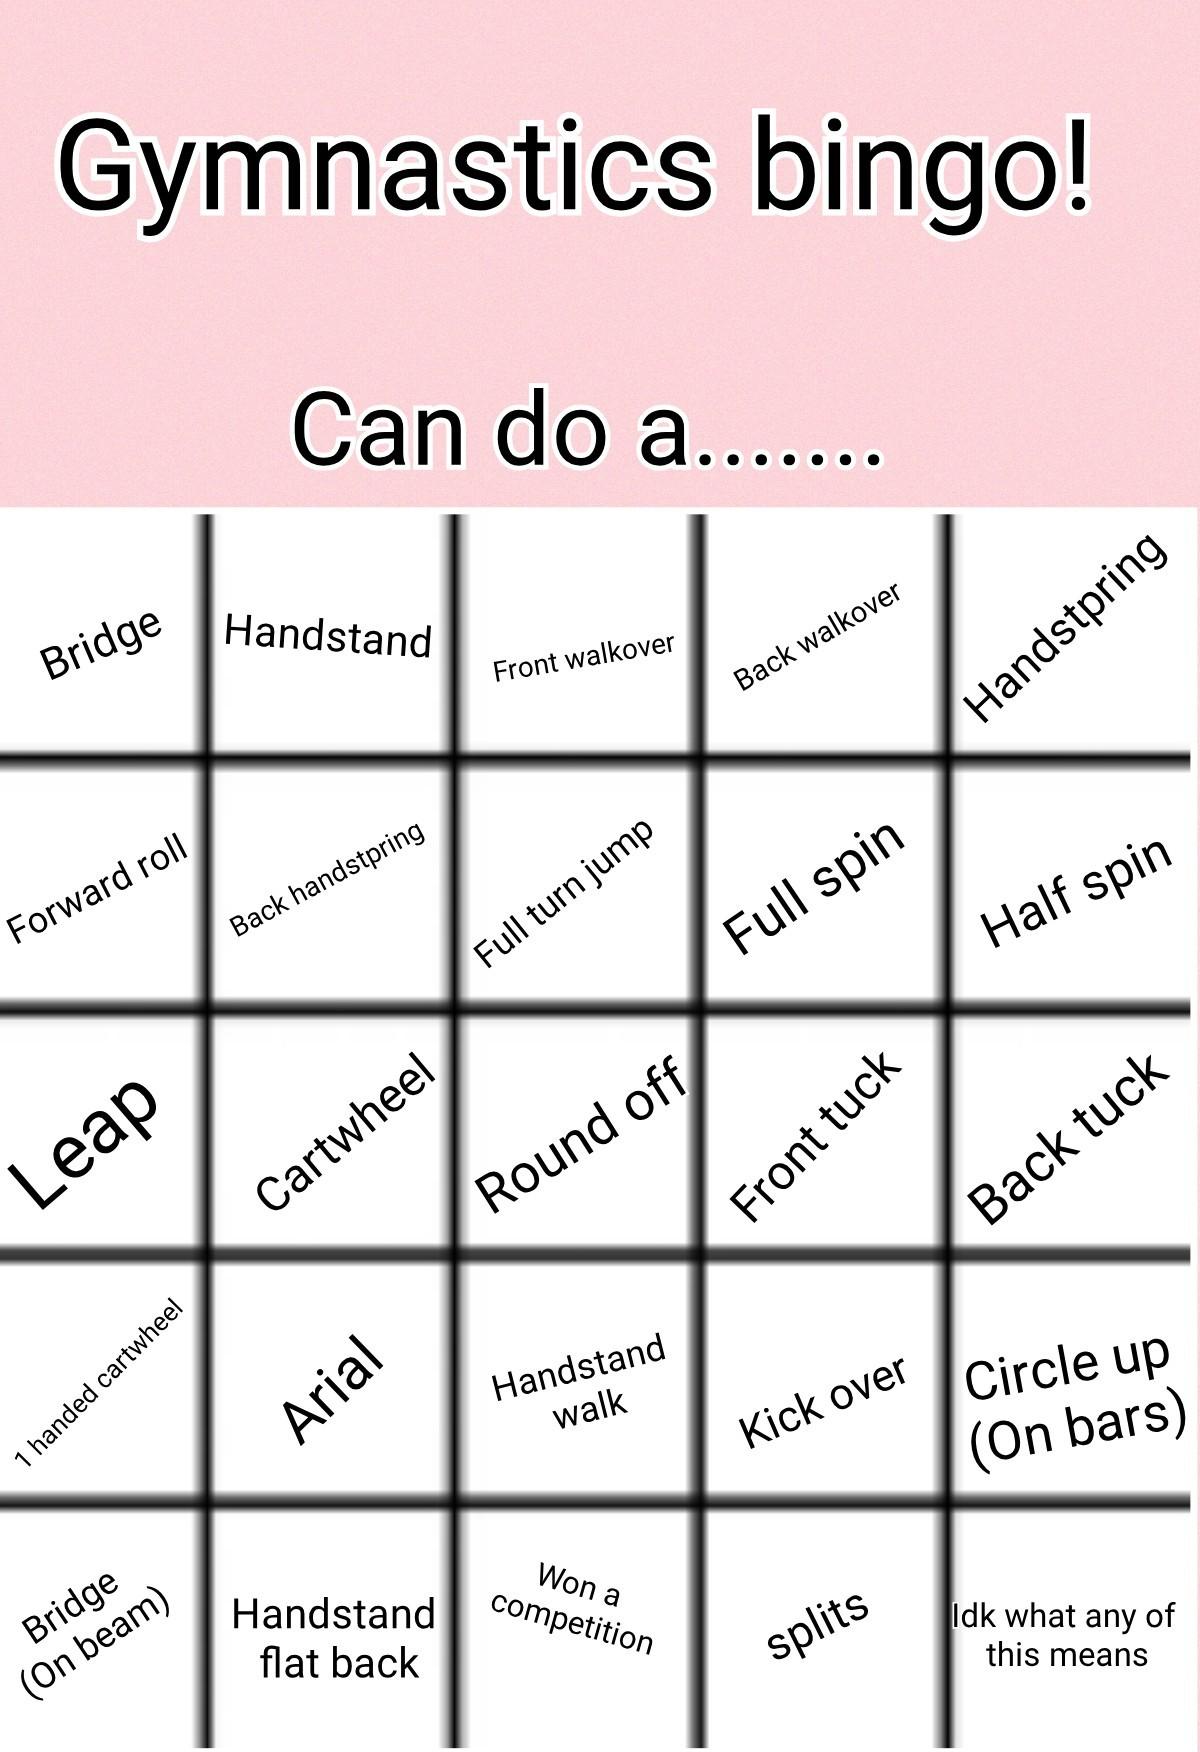 Gymnastics bingo so I can see what level everyone is at